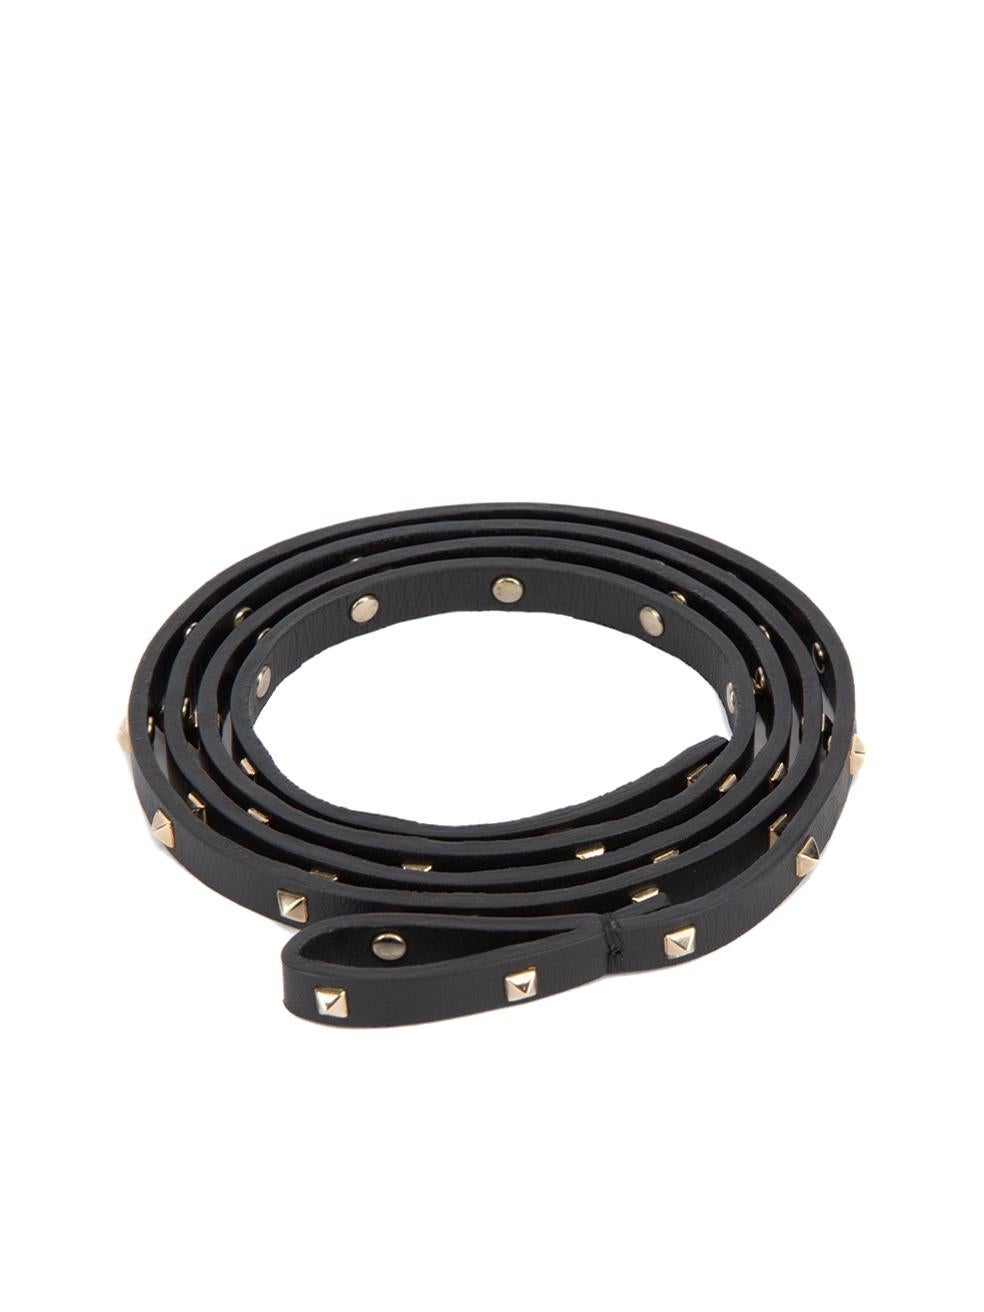 CONDITION is Very good. Hardly any visible wear to belt is evident on this used Valentino designer resale item. This item includes the original dustbag and box.  Details  Black Leather Rockstud embellishments Wrap belt Box included      Made in